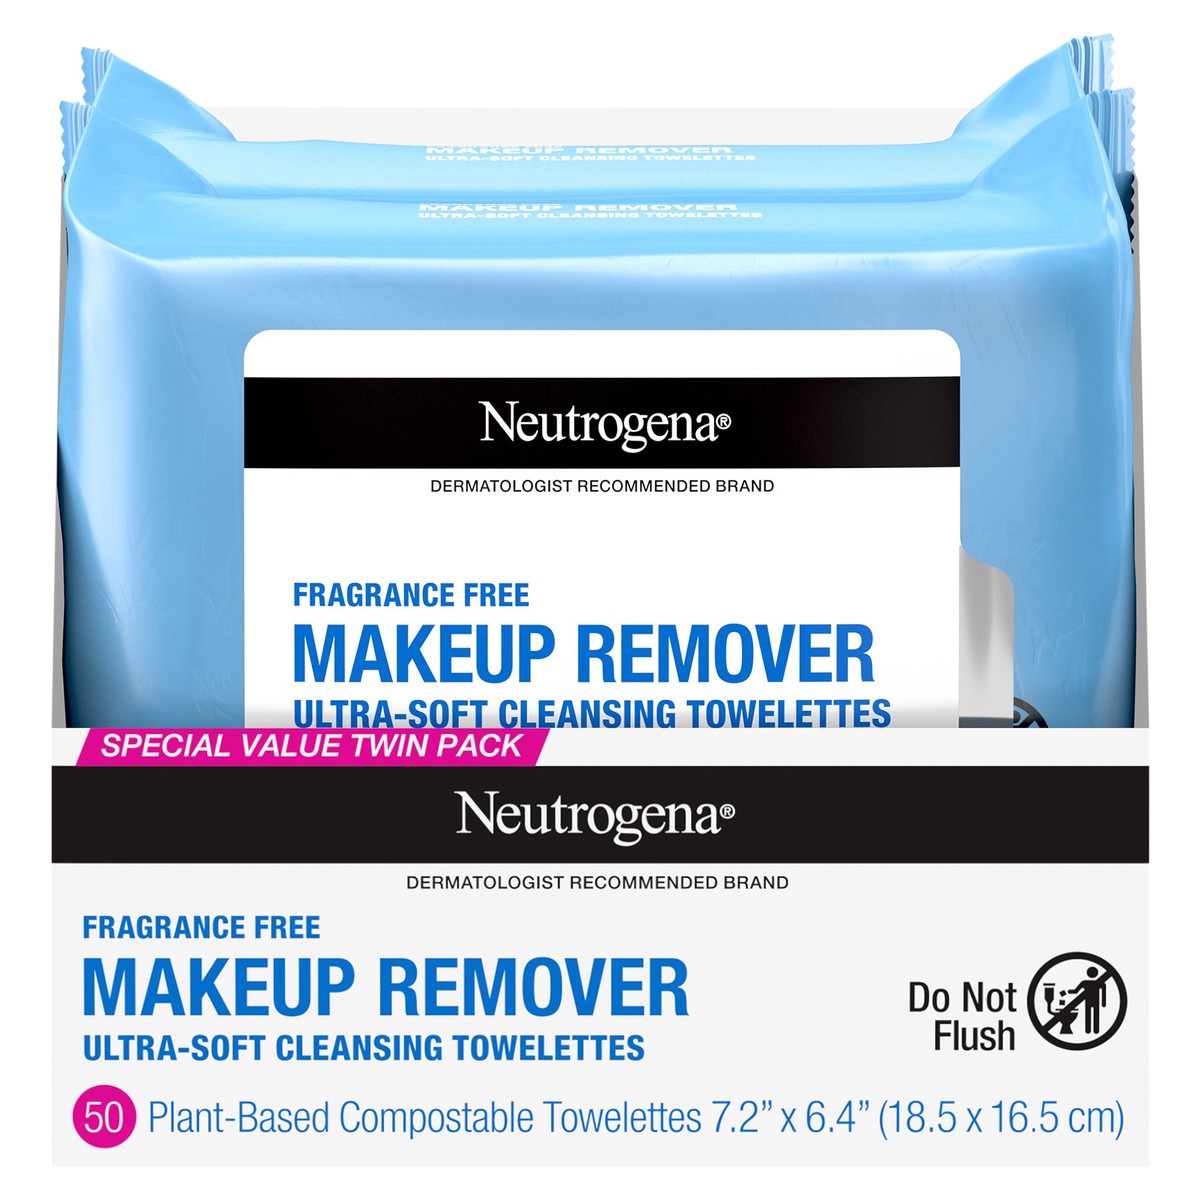 slide 9 of 10, Neutrogena Fragrance-Free Makeup Remover Wipes, Daily Facial Cleanser Towelettes, Gently Removes Oil & Makeup, Alcohol-Free Makeup Wipes, Twin Pack, 2 x 25 ct, 50 ct